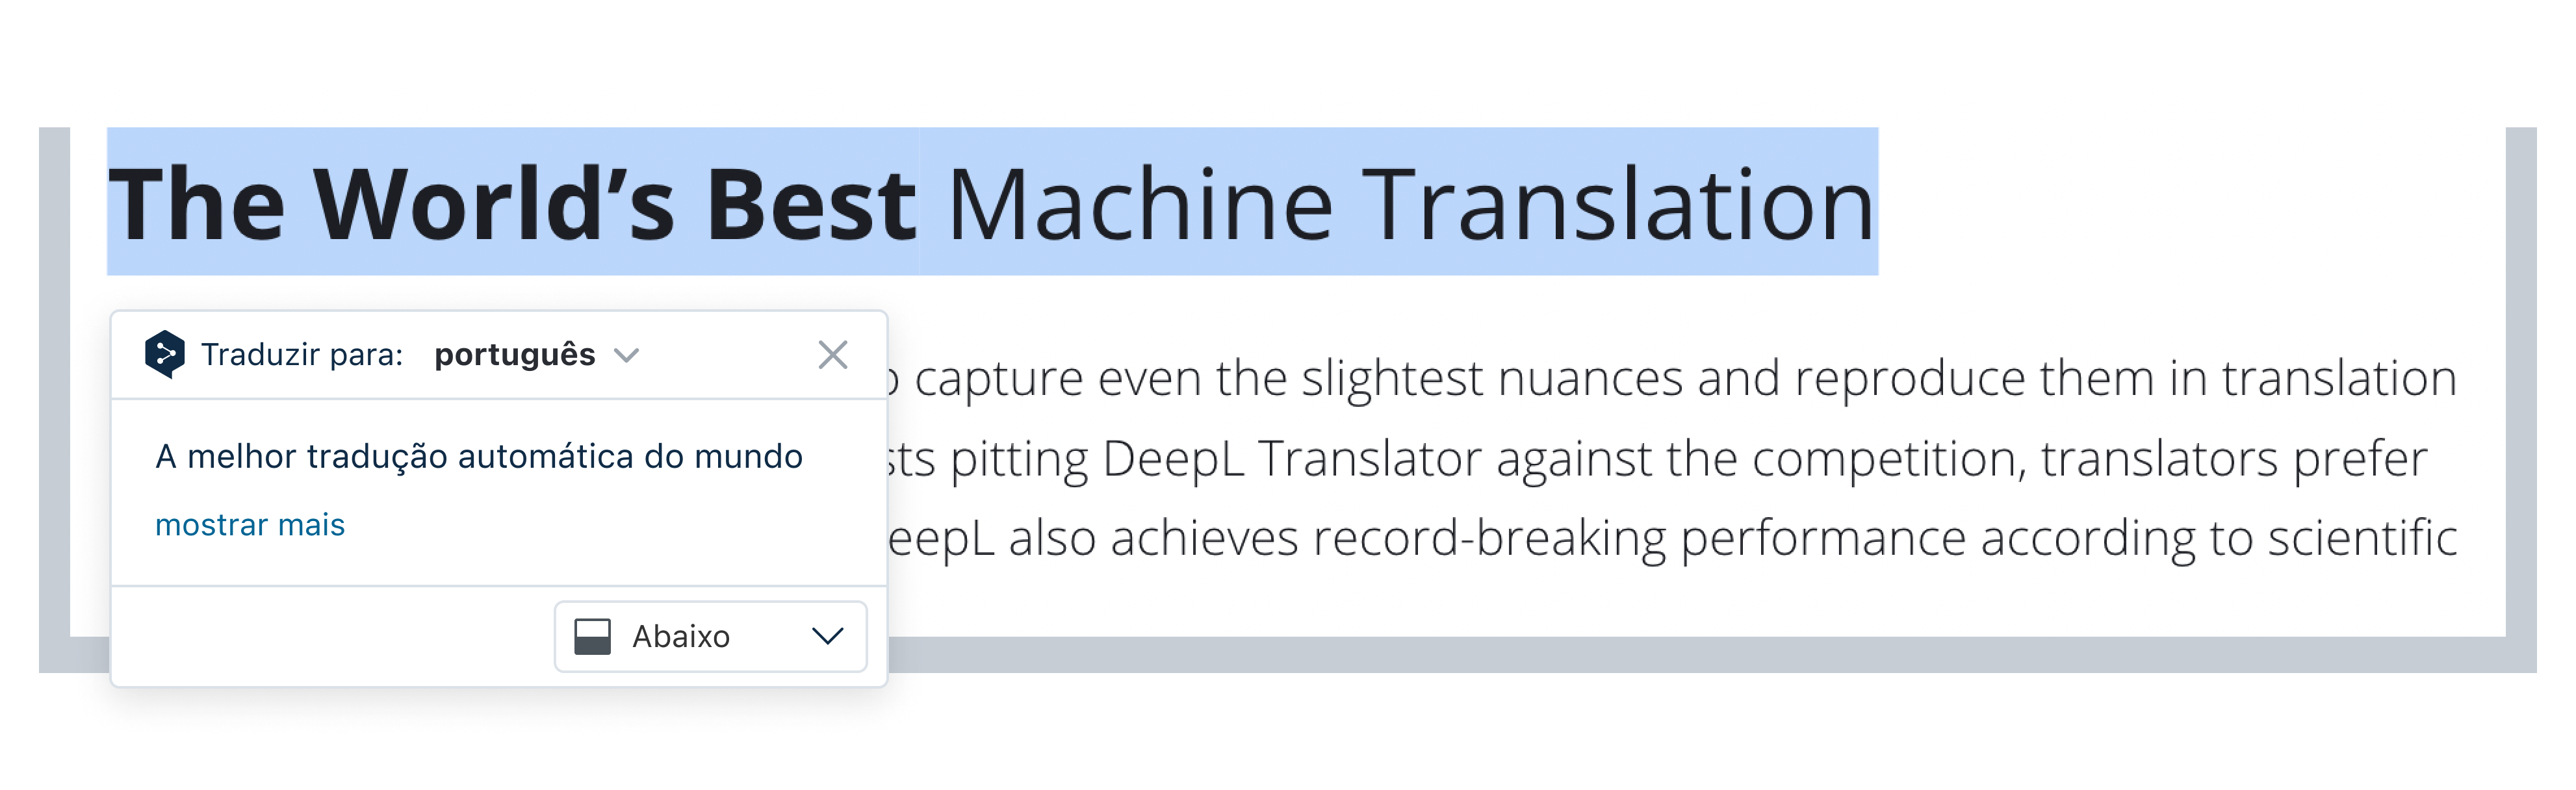 On the DeepL website, the text "The World's Best Machine Translation" is highlight, and the Chrome Extension icon pops up, which depicts the sentence translated to German.